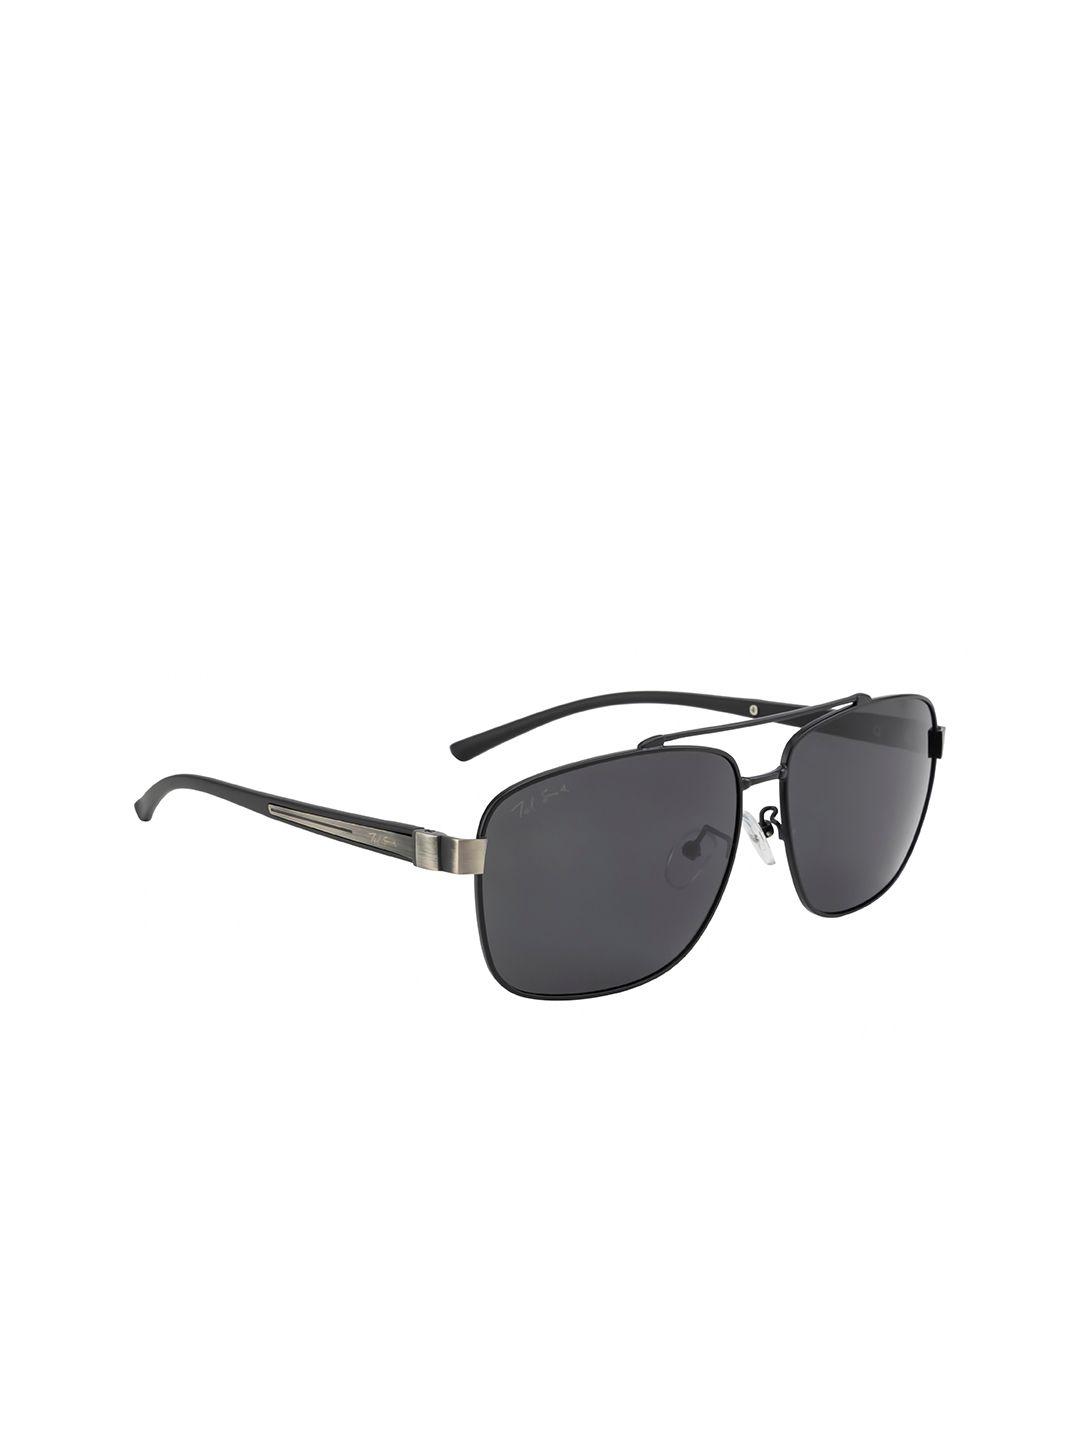 ted smith unisex grey lens & black aviator sunglasses with polarised and uv protected lens